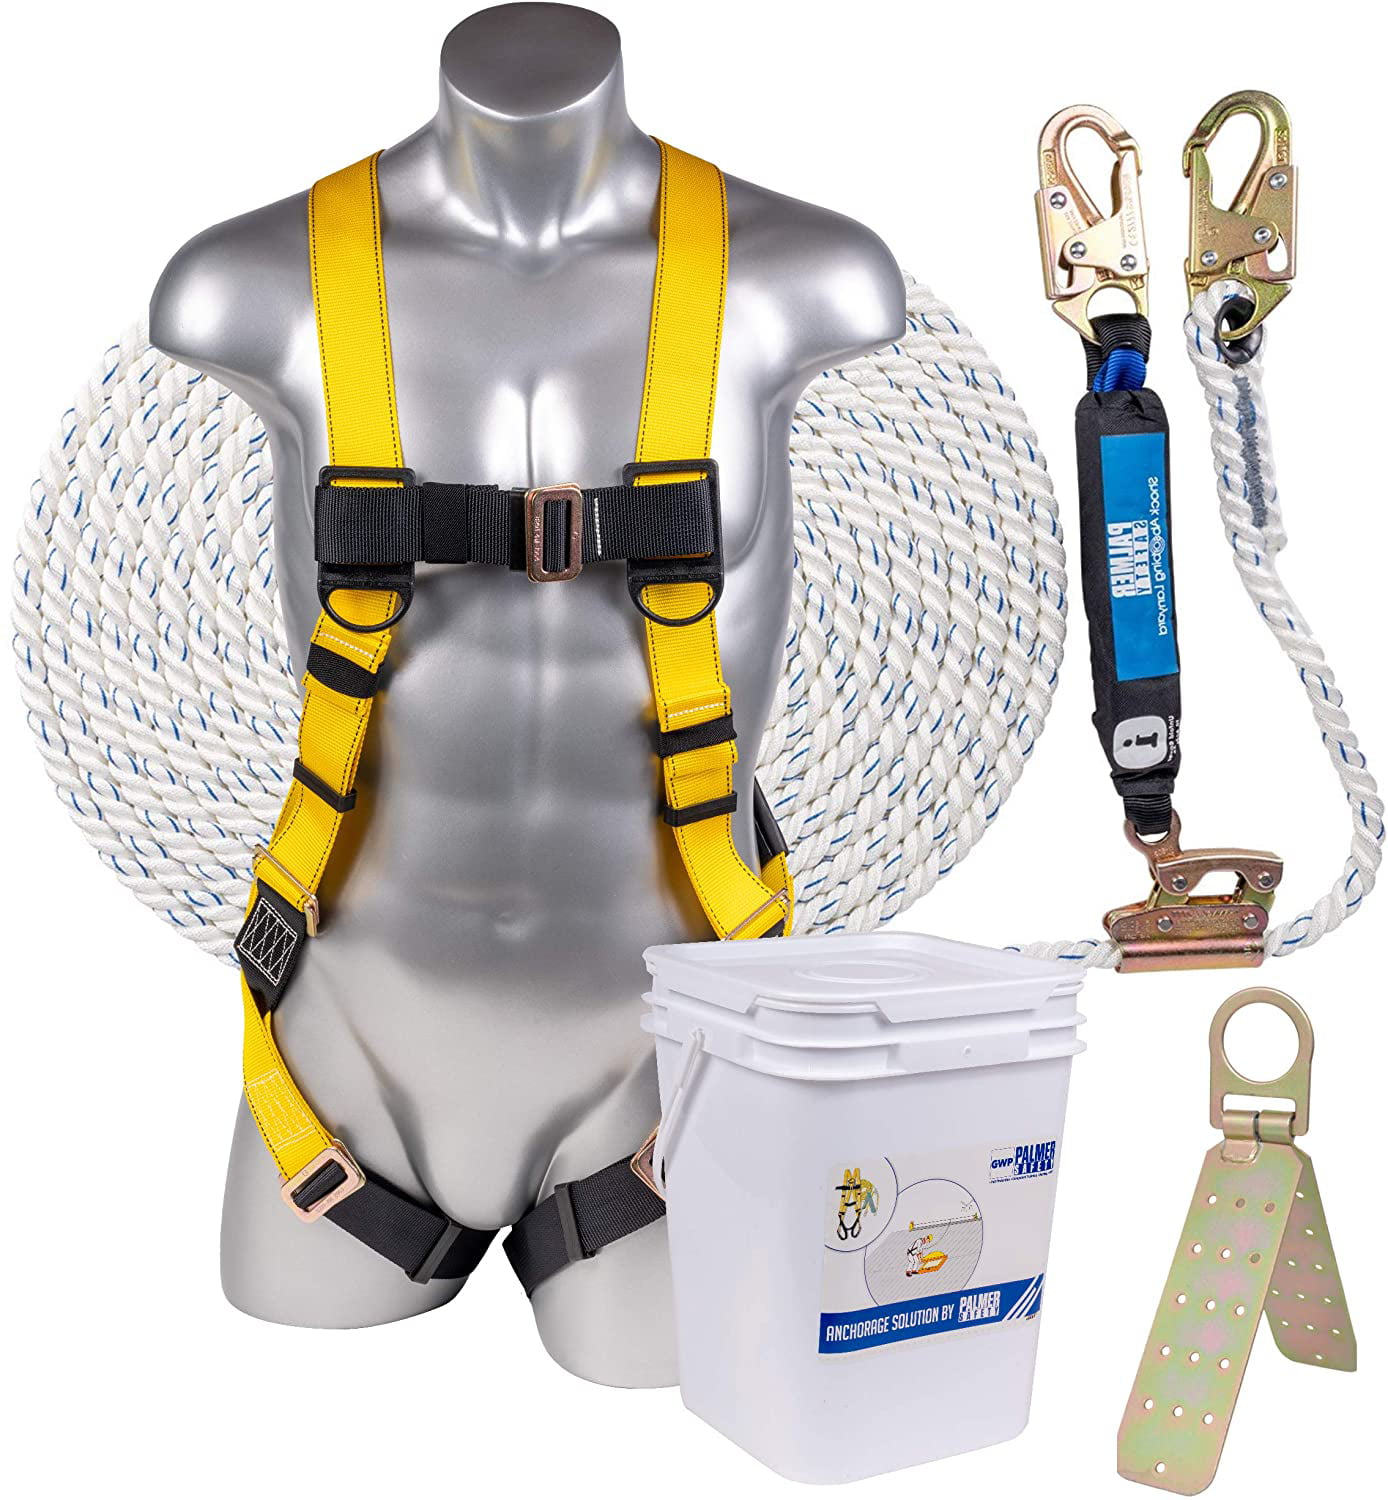 Muddy The Safety Harness Lineman's Rope Msa070 for sale online 